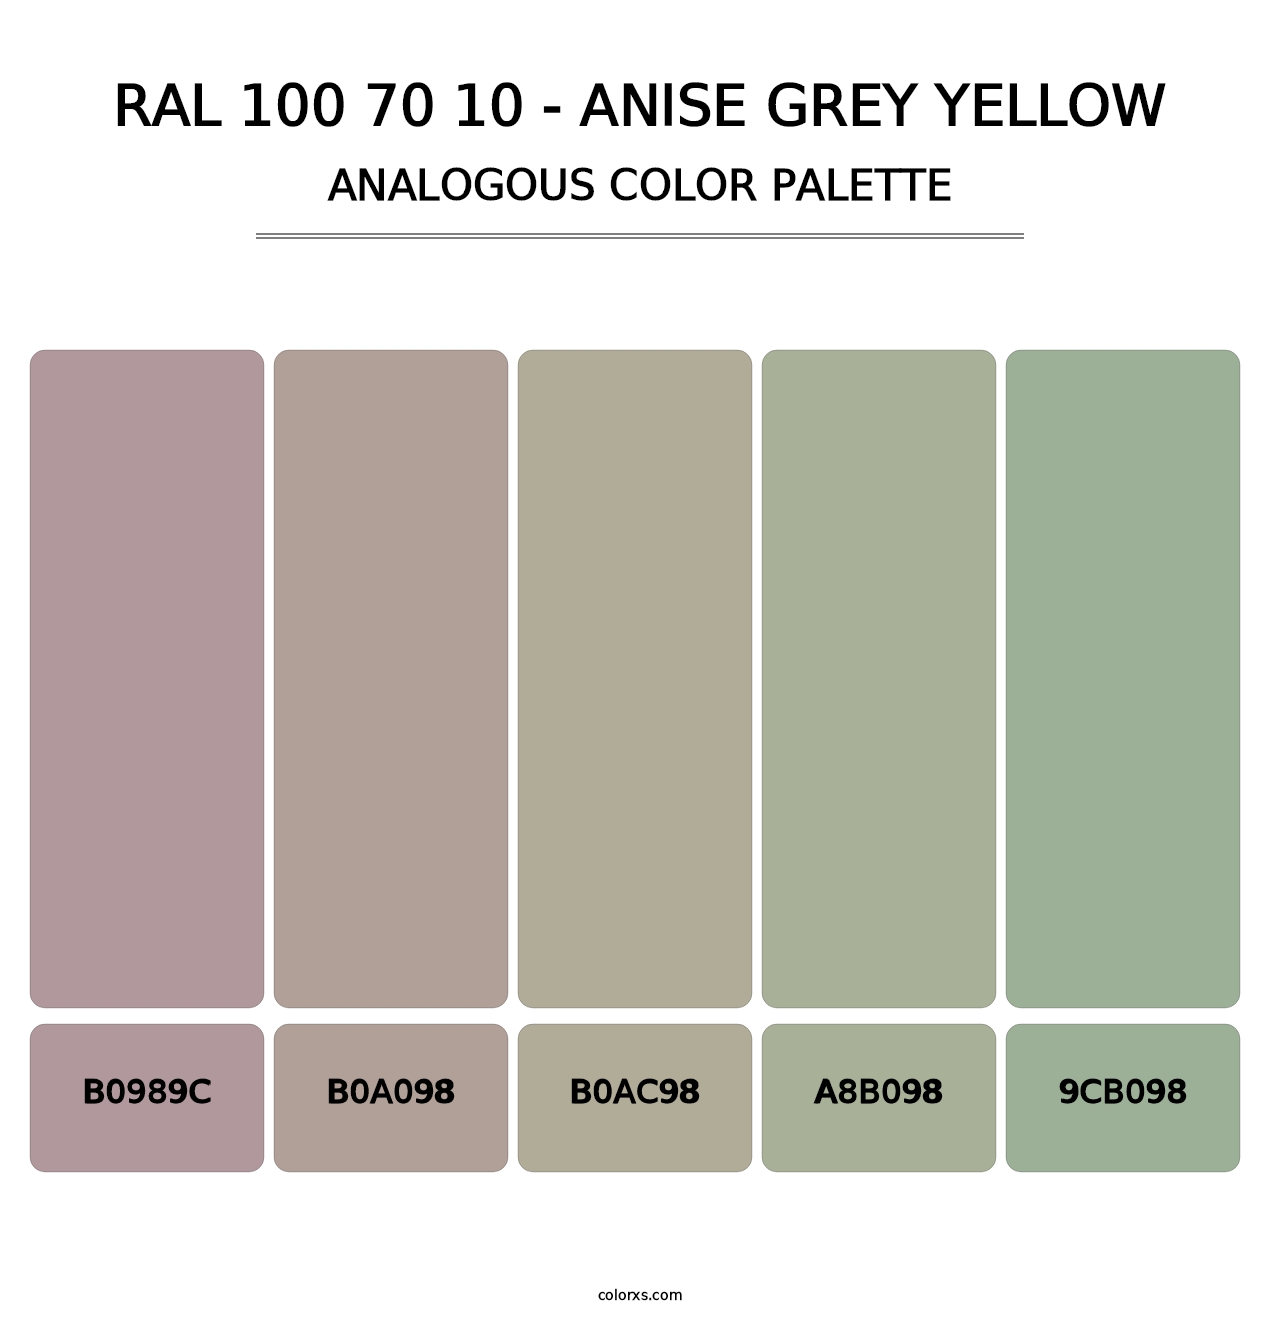 RAL 100 70 10 - Anise Grey Yellow - Analogous Color Palette